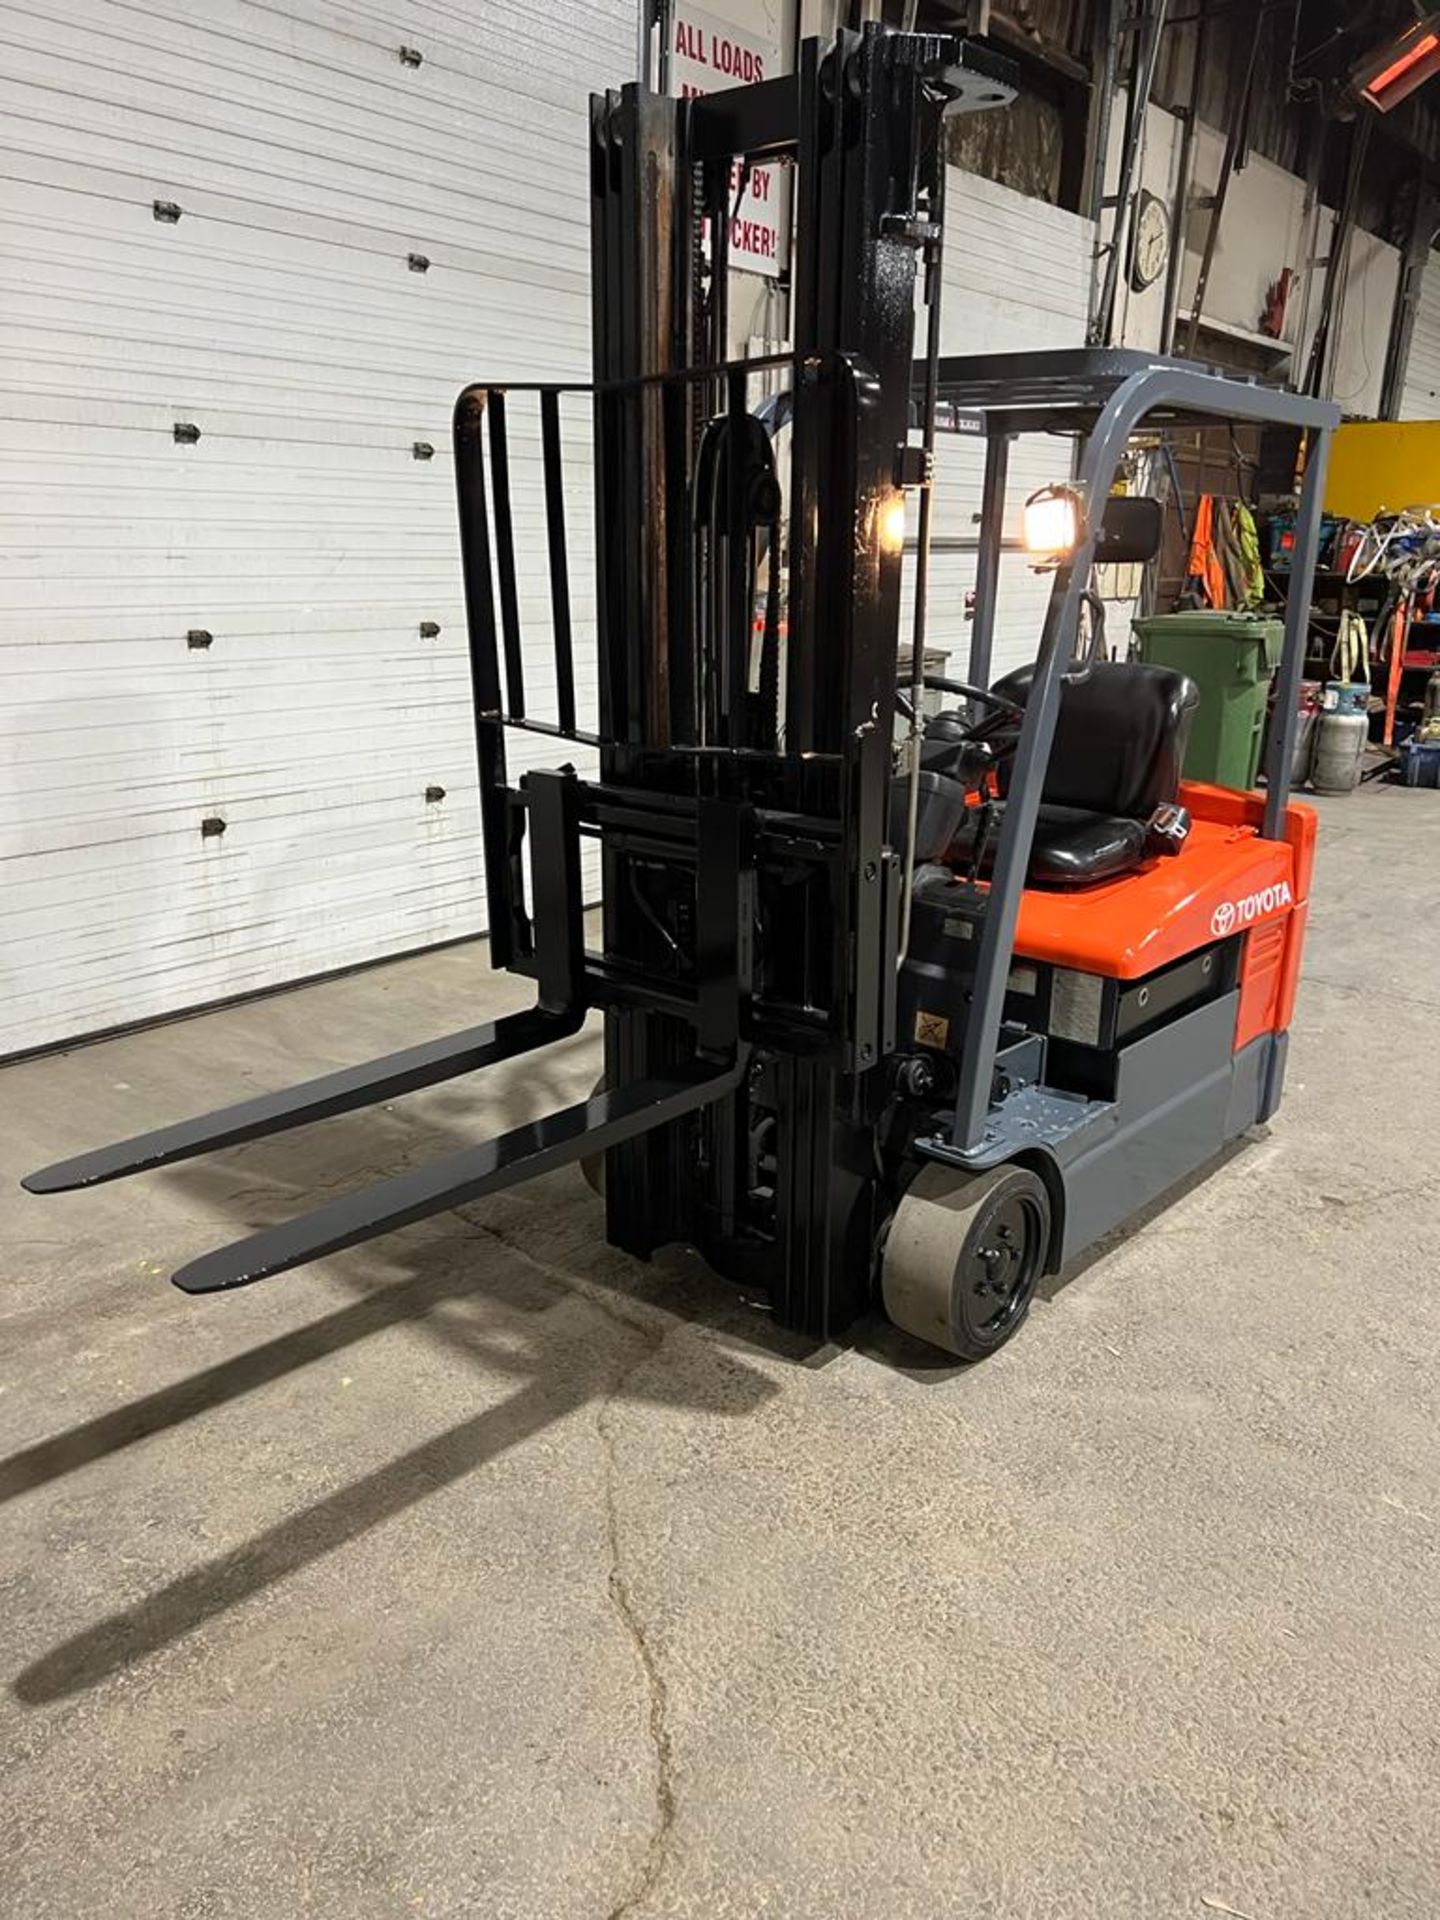 NICE Toyota 4,000lbs Capacity Forklift Electric 36V 3-Wheel with Sideshift 3-stage mast - FREE - Image 3 of 3